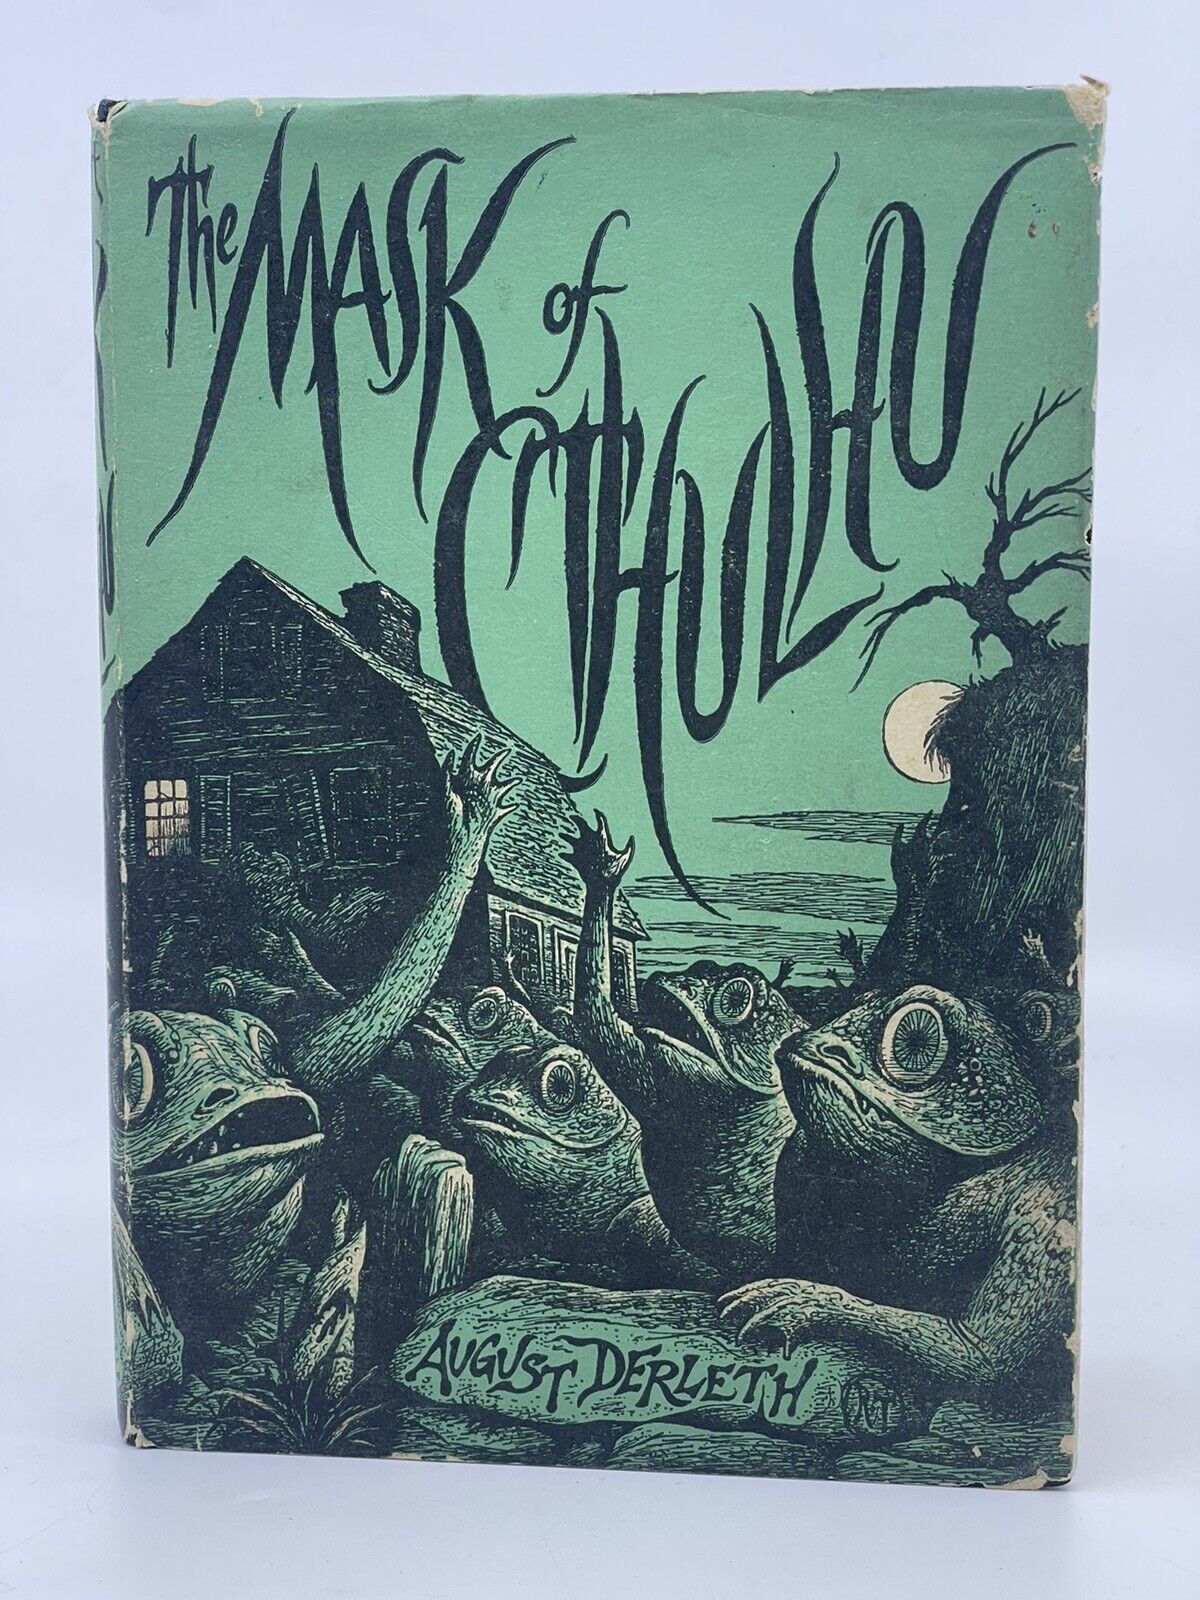 The Mask of Cthulhu 1st Edition 1958 Arkham House August Derleth Antique RARE